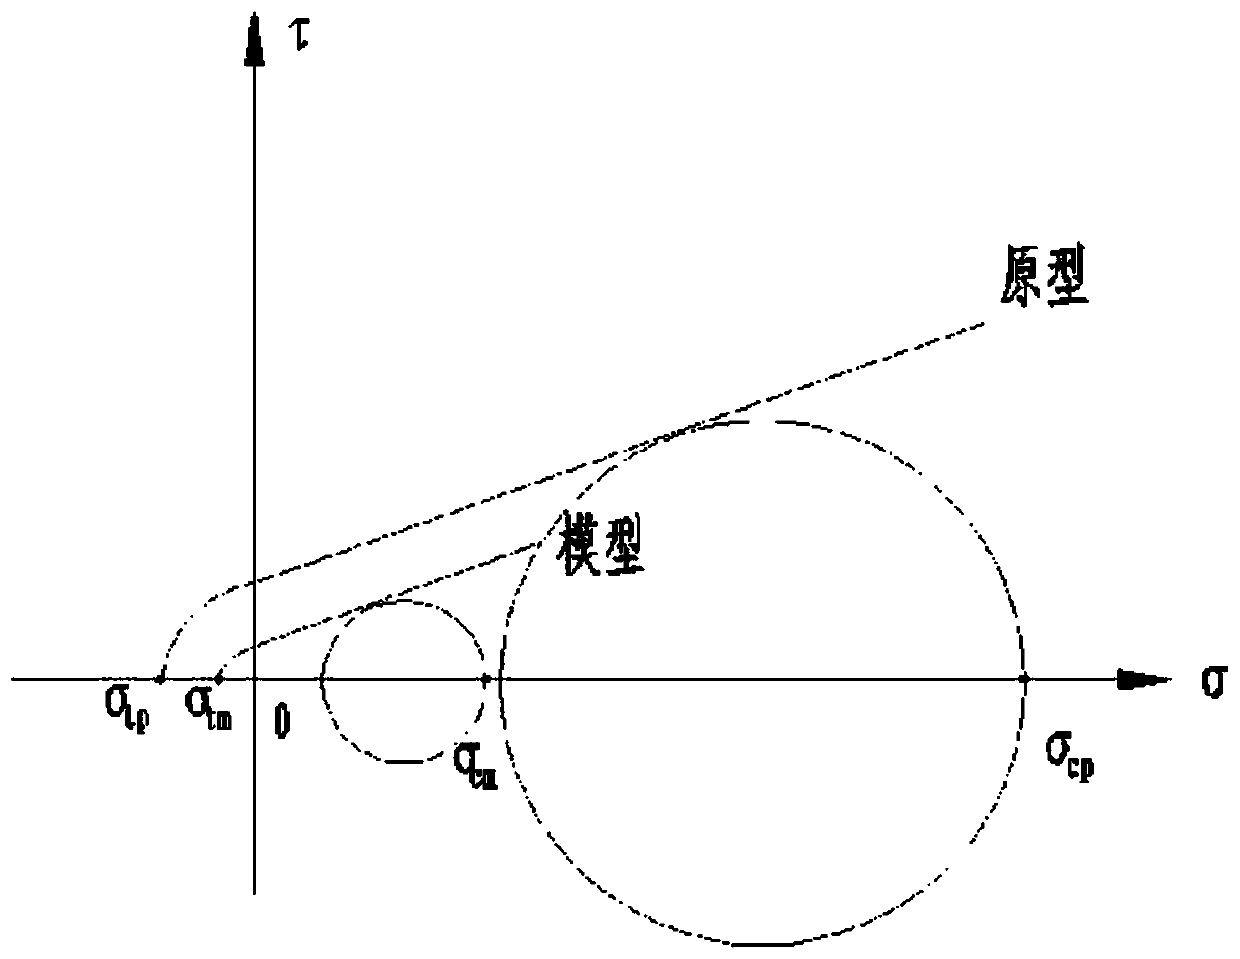 Slope stability determination method for slope geomechanical model and application